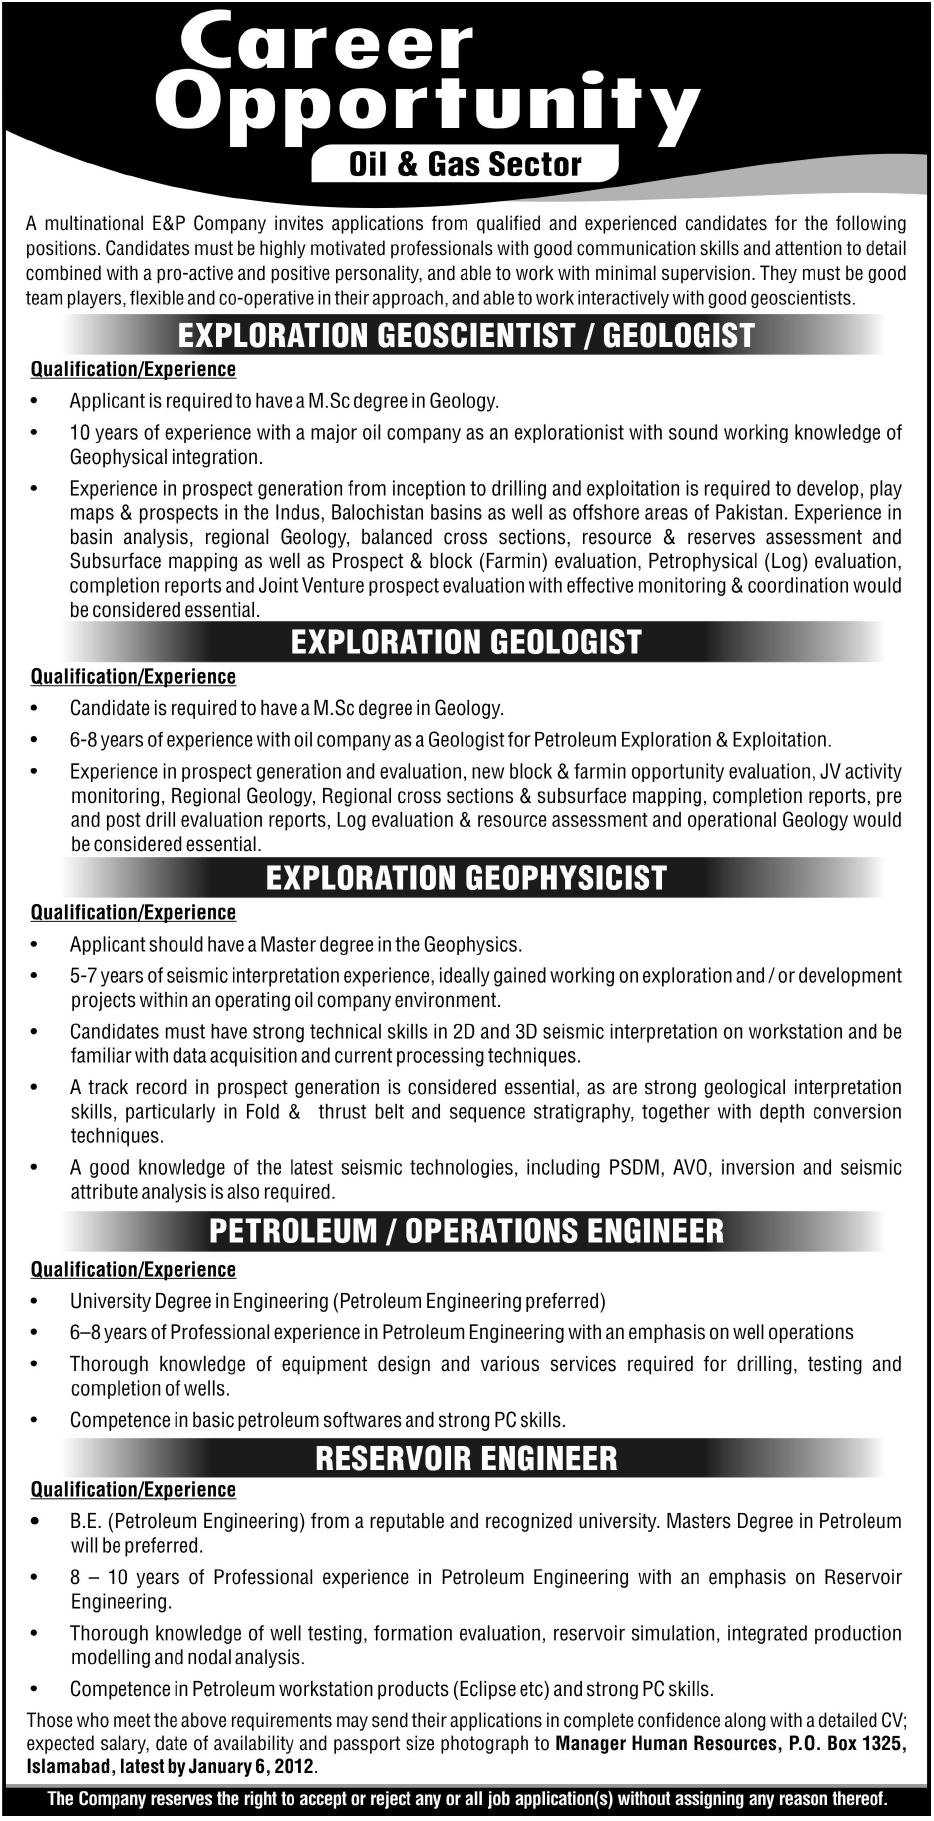 Jobs in Oil and Gas Sector Company